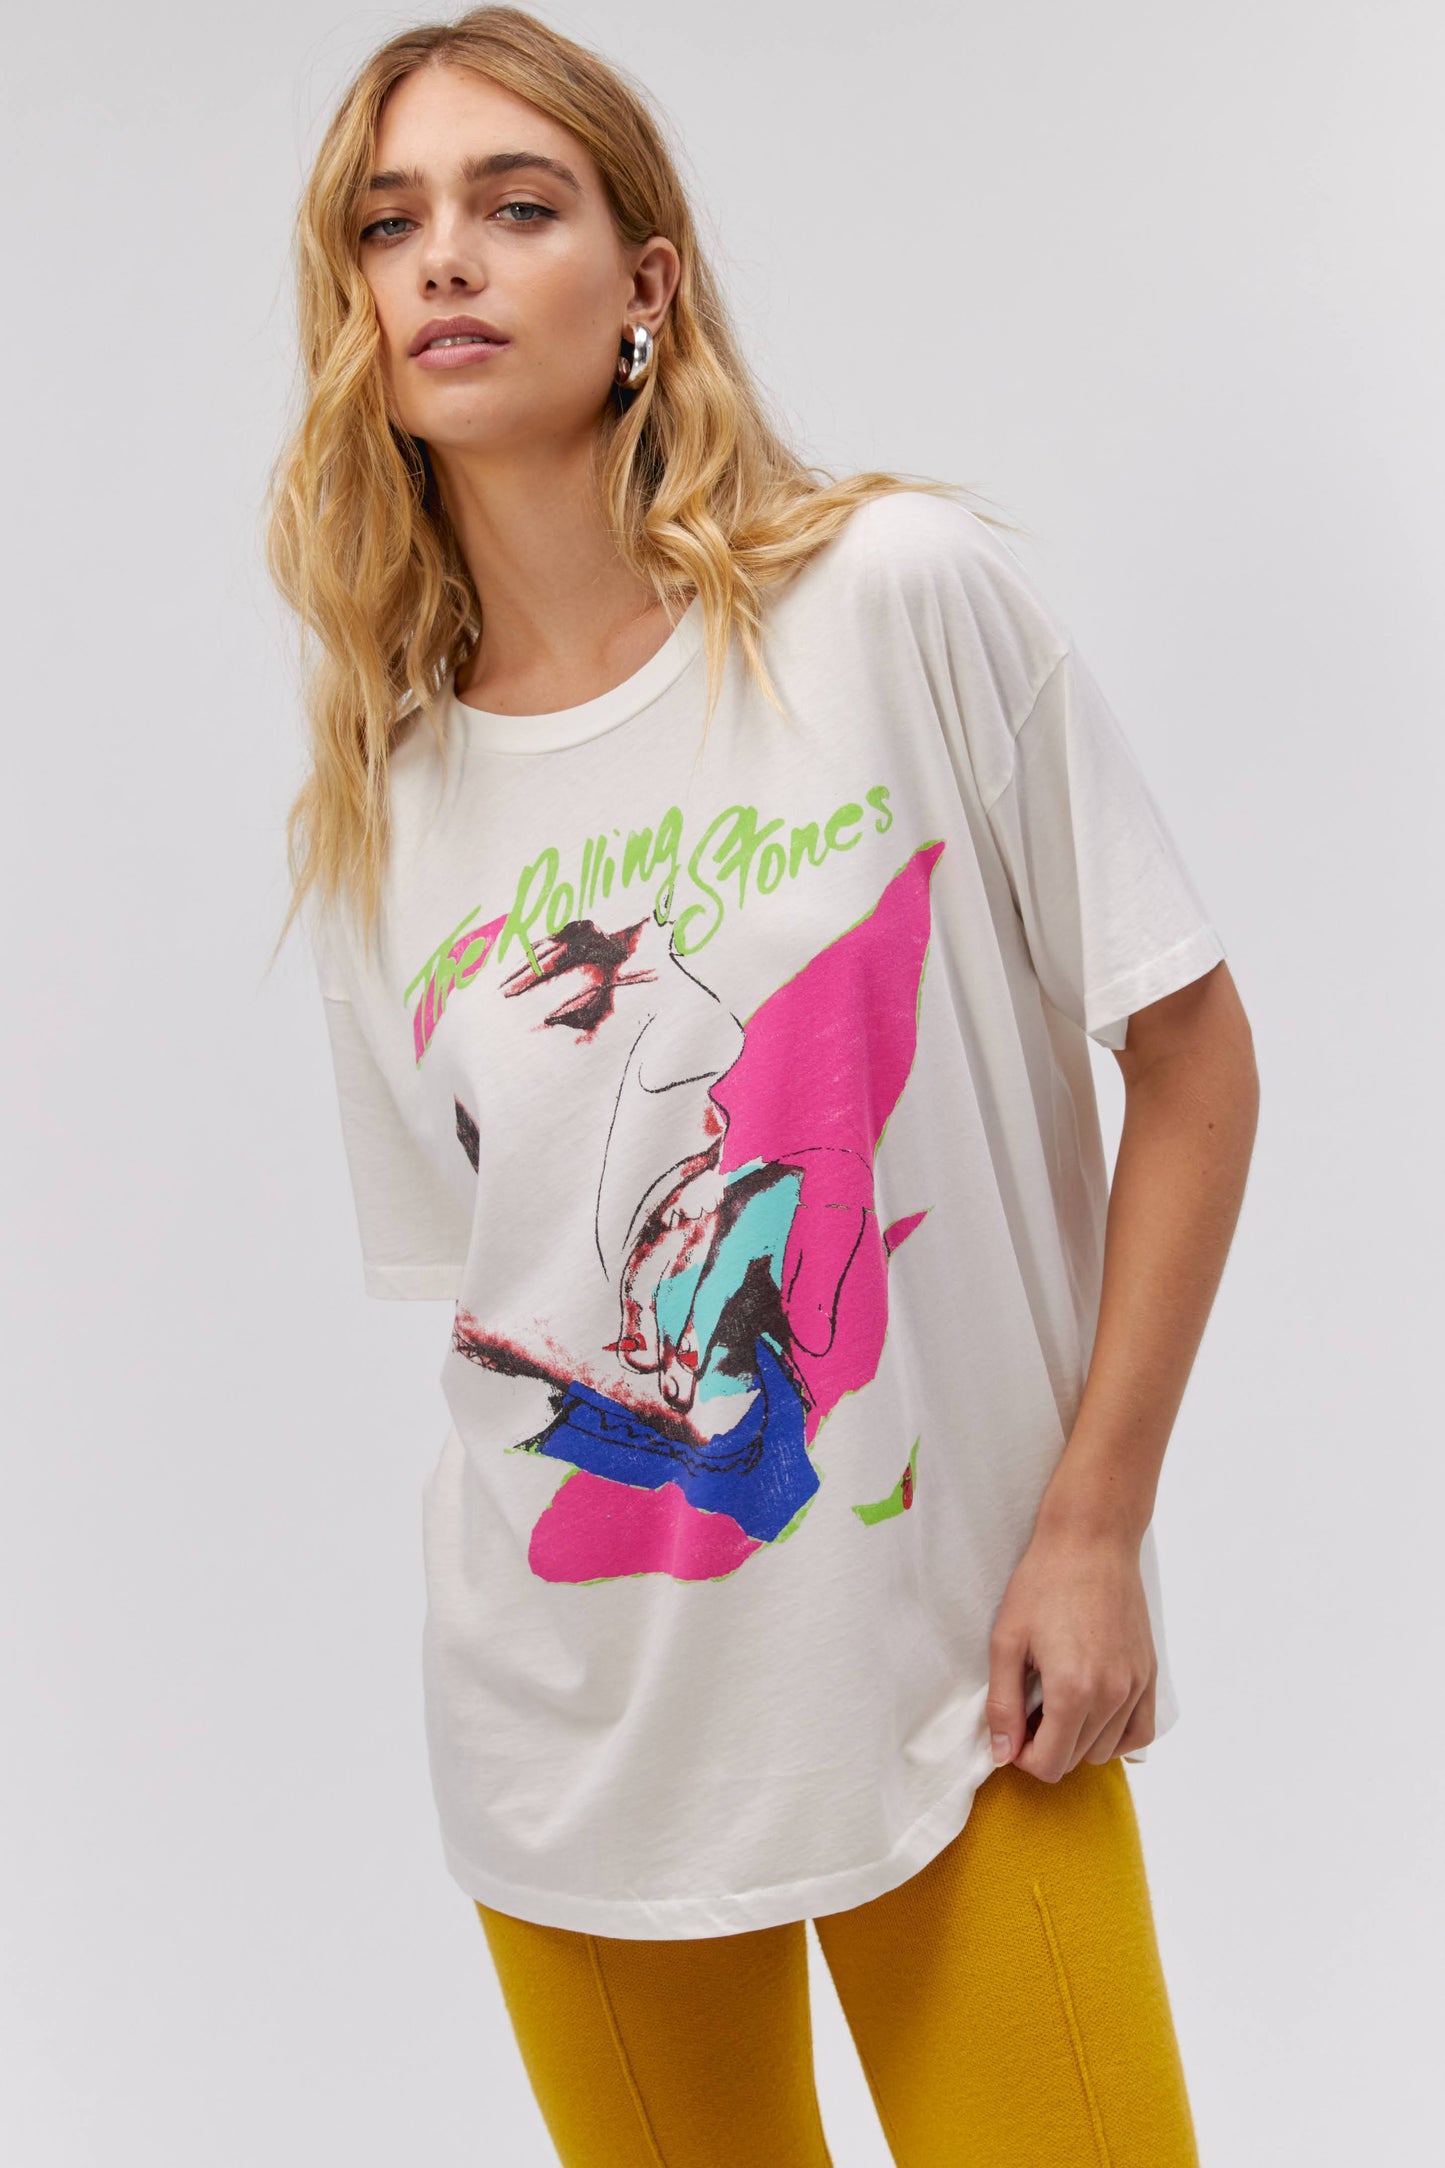 A blonde-haired model featuring a white tee designed with the Rolling Stones album cover, Love You Live.